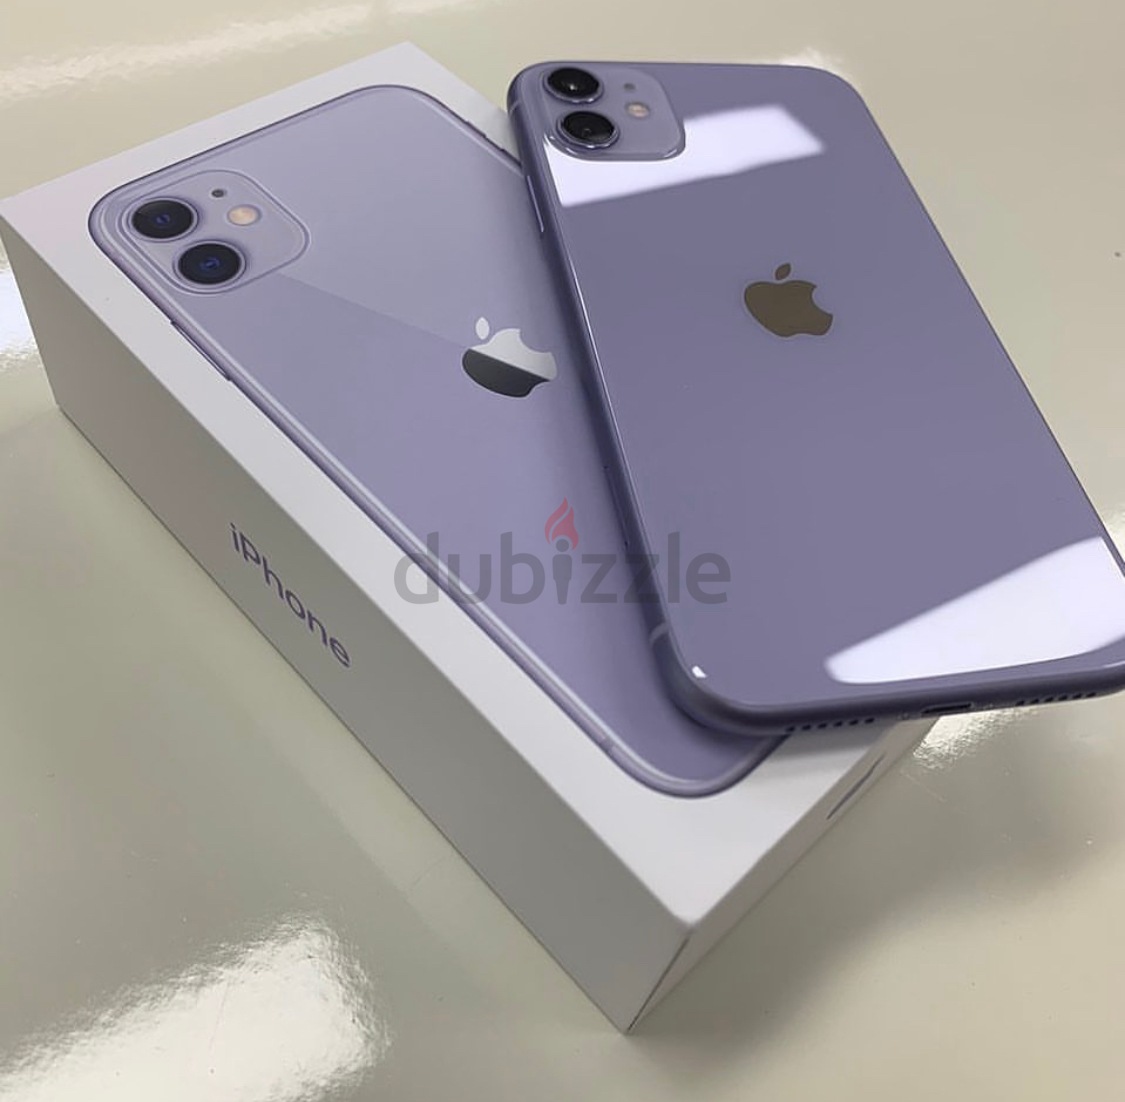 iPhone 11 purple 128G refurbished with 6 months warranty | dubizzle